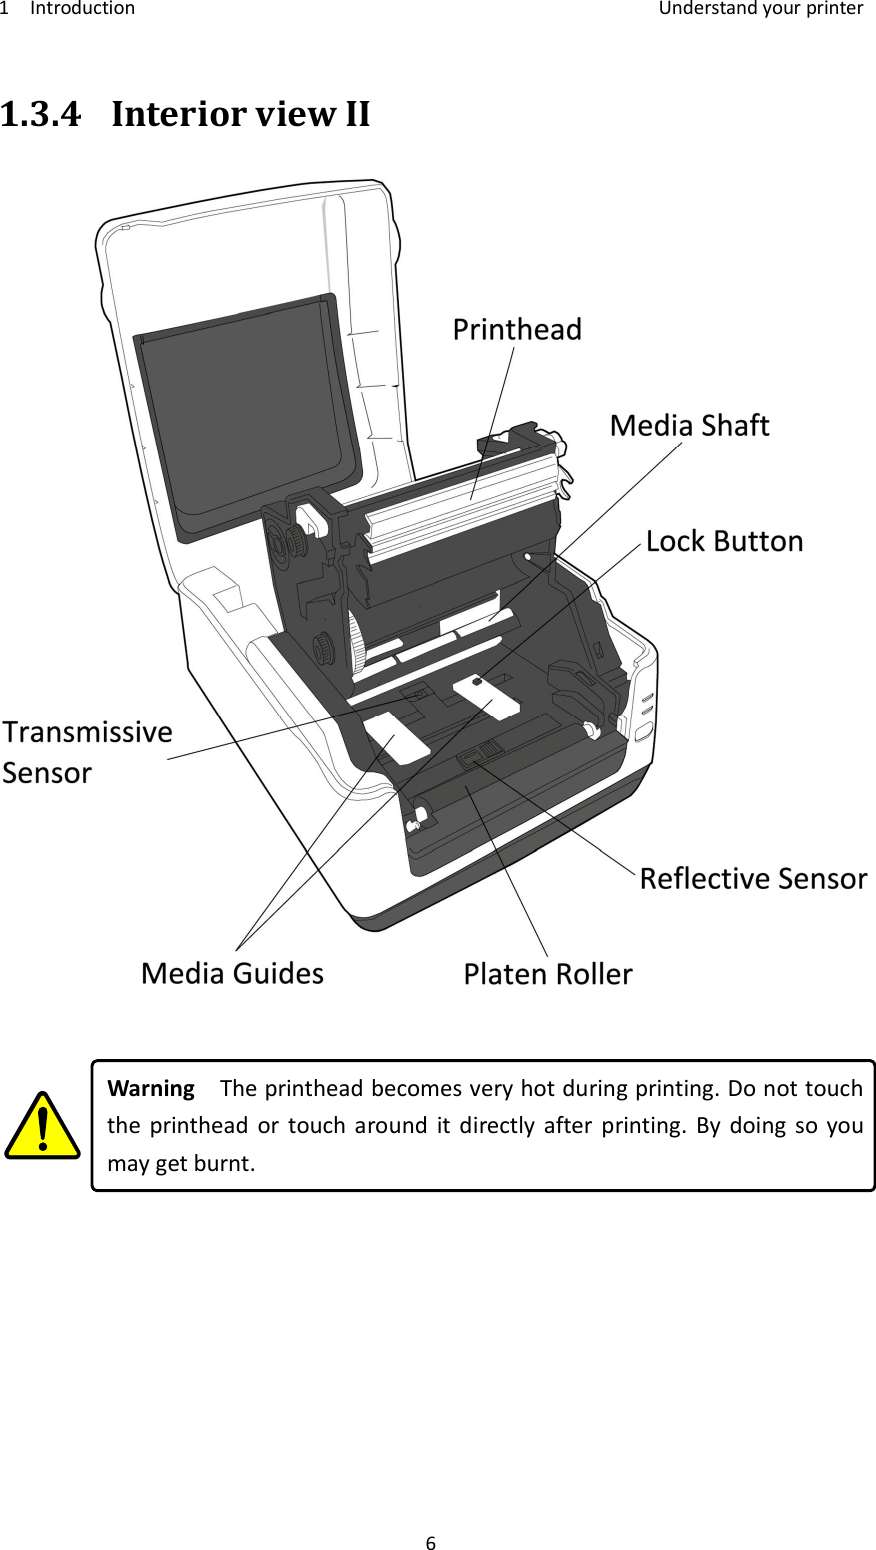 1    Introduction    Understand your printer 6 1.3.4 Interior view II     Warning    The printhead becomes very hot during printing. Do not touch the  printhead  or  touch  around  it  directly  after  printing.  By  doing  so you may get burnt.   